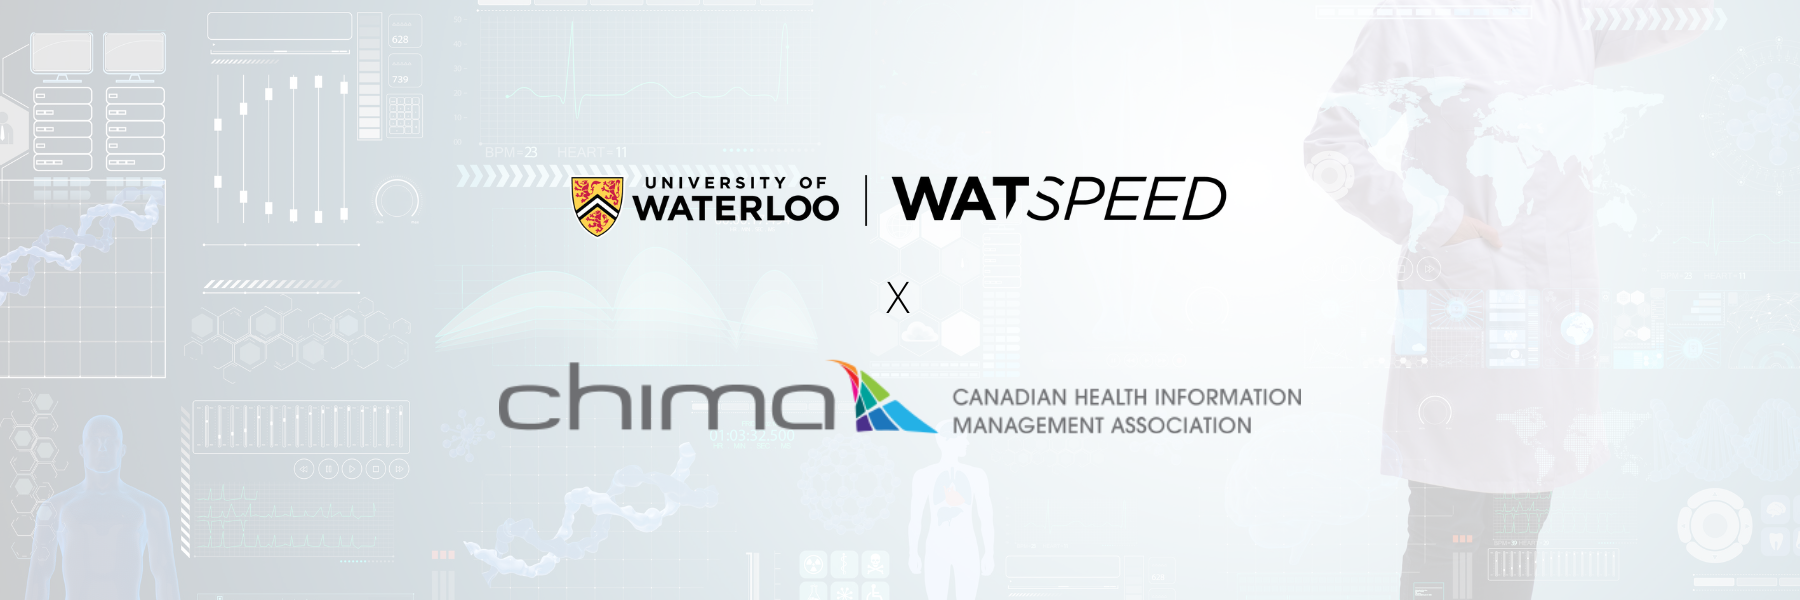 Canadian Health Information Management Association and WatSPEED at the University of Waterloo logos